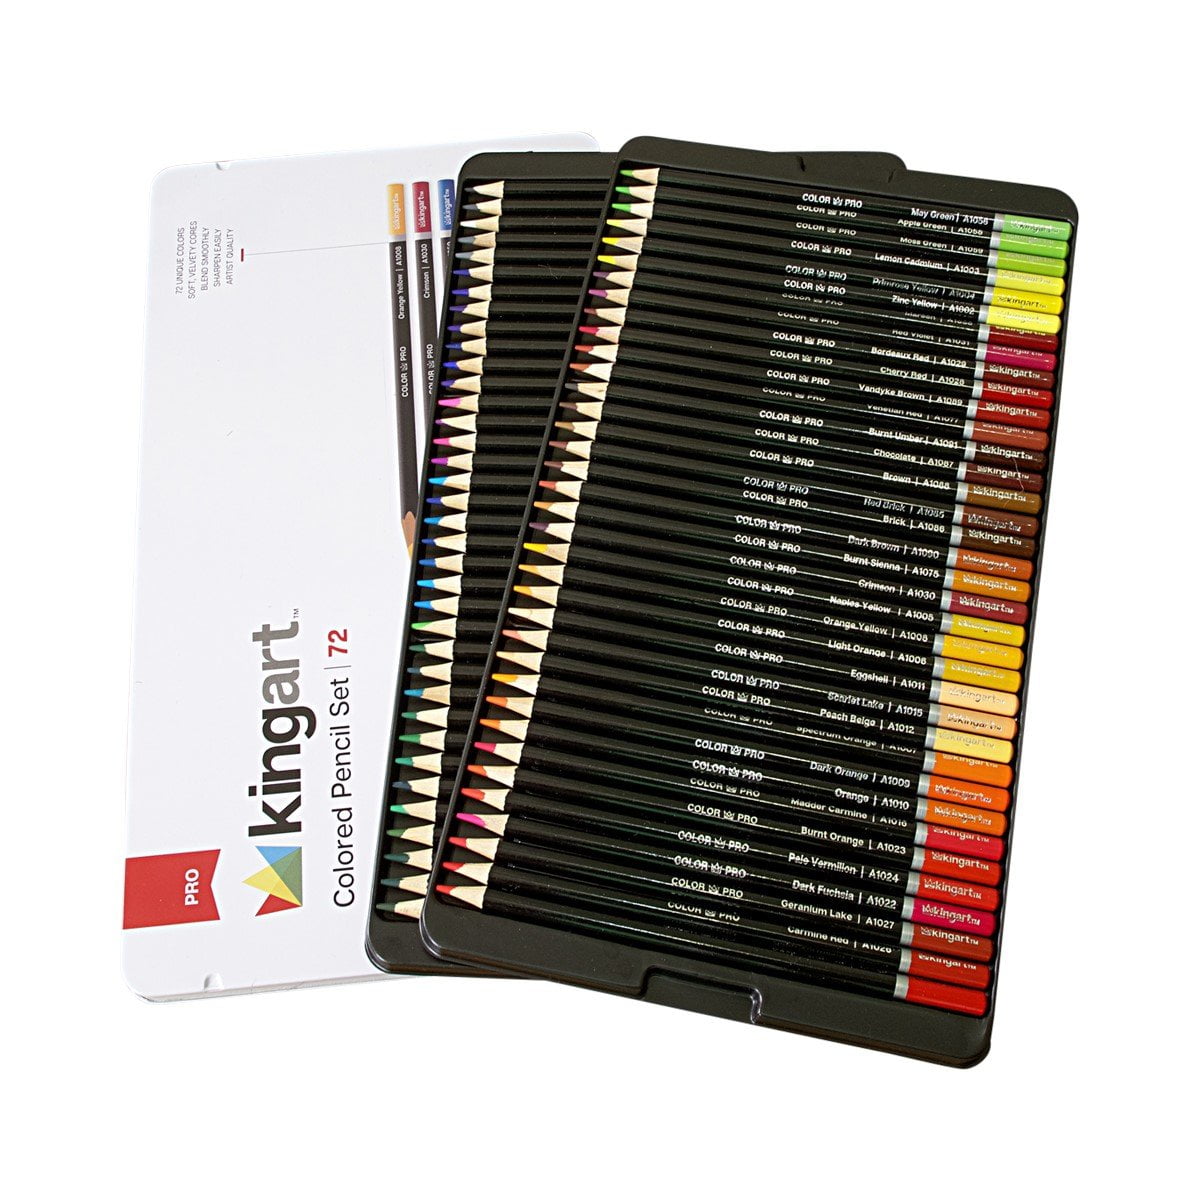 Exotic Colors Colored Pencil Set for Fans of Tiger King | Set of 12 Tiger King-Inspired Parody Pencils | Each Color Pencil Is Foil-Stamped with Clever